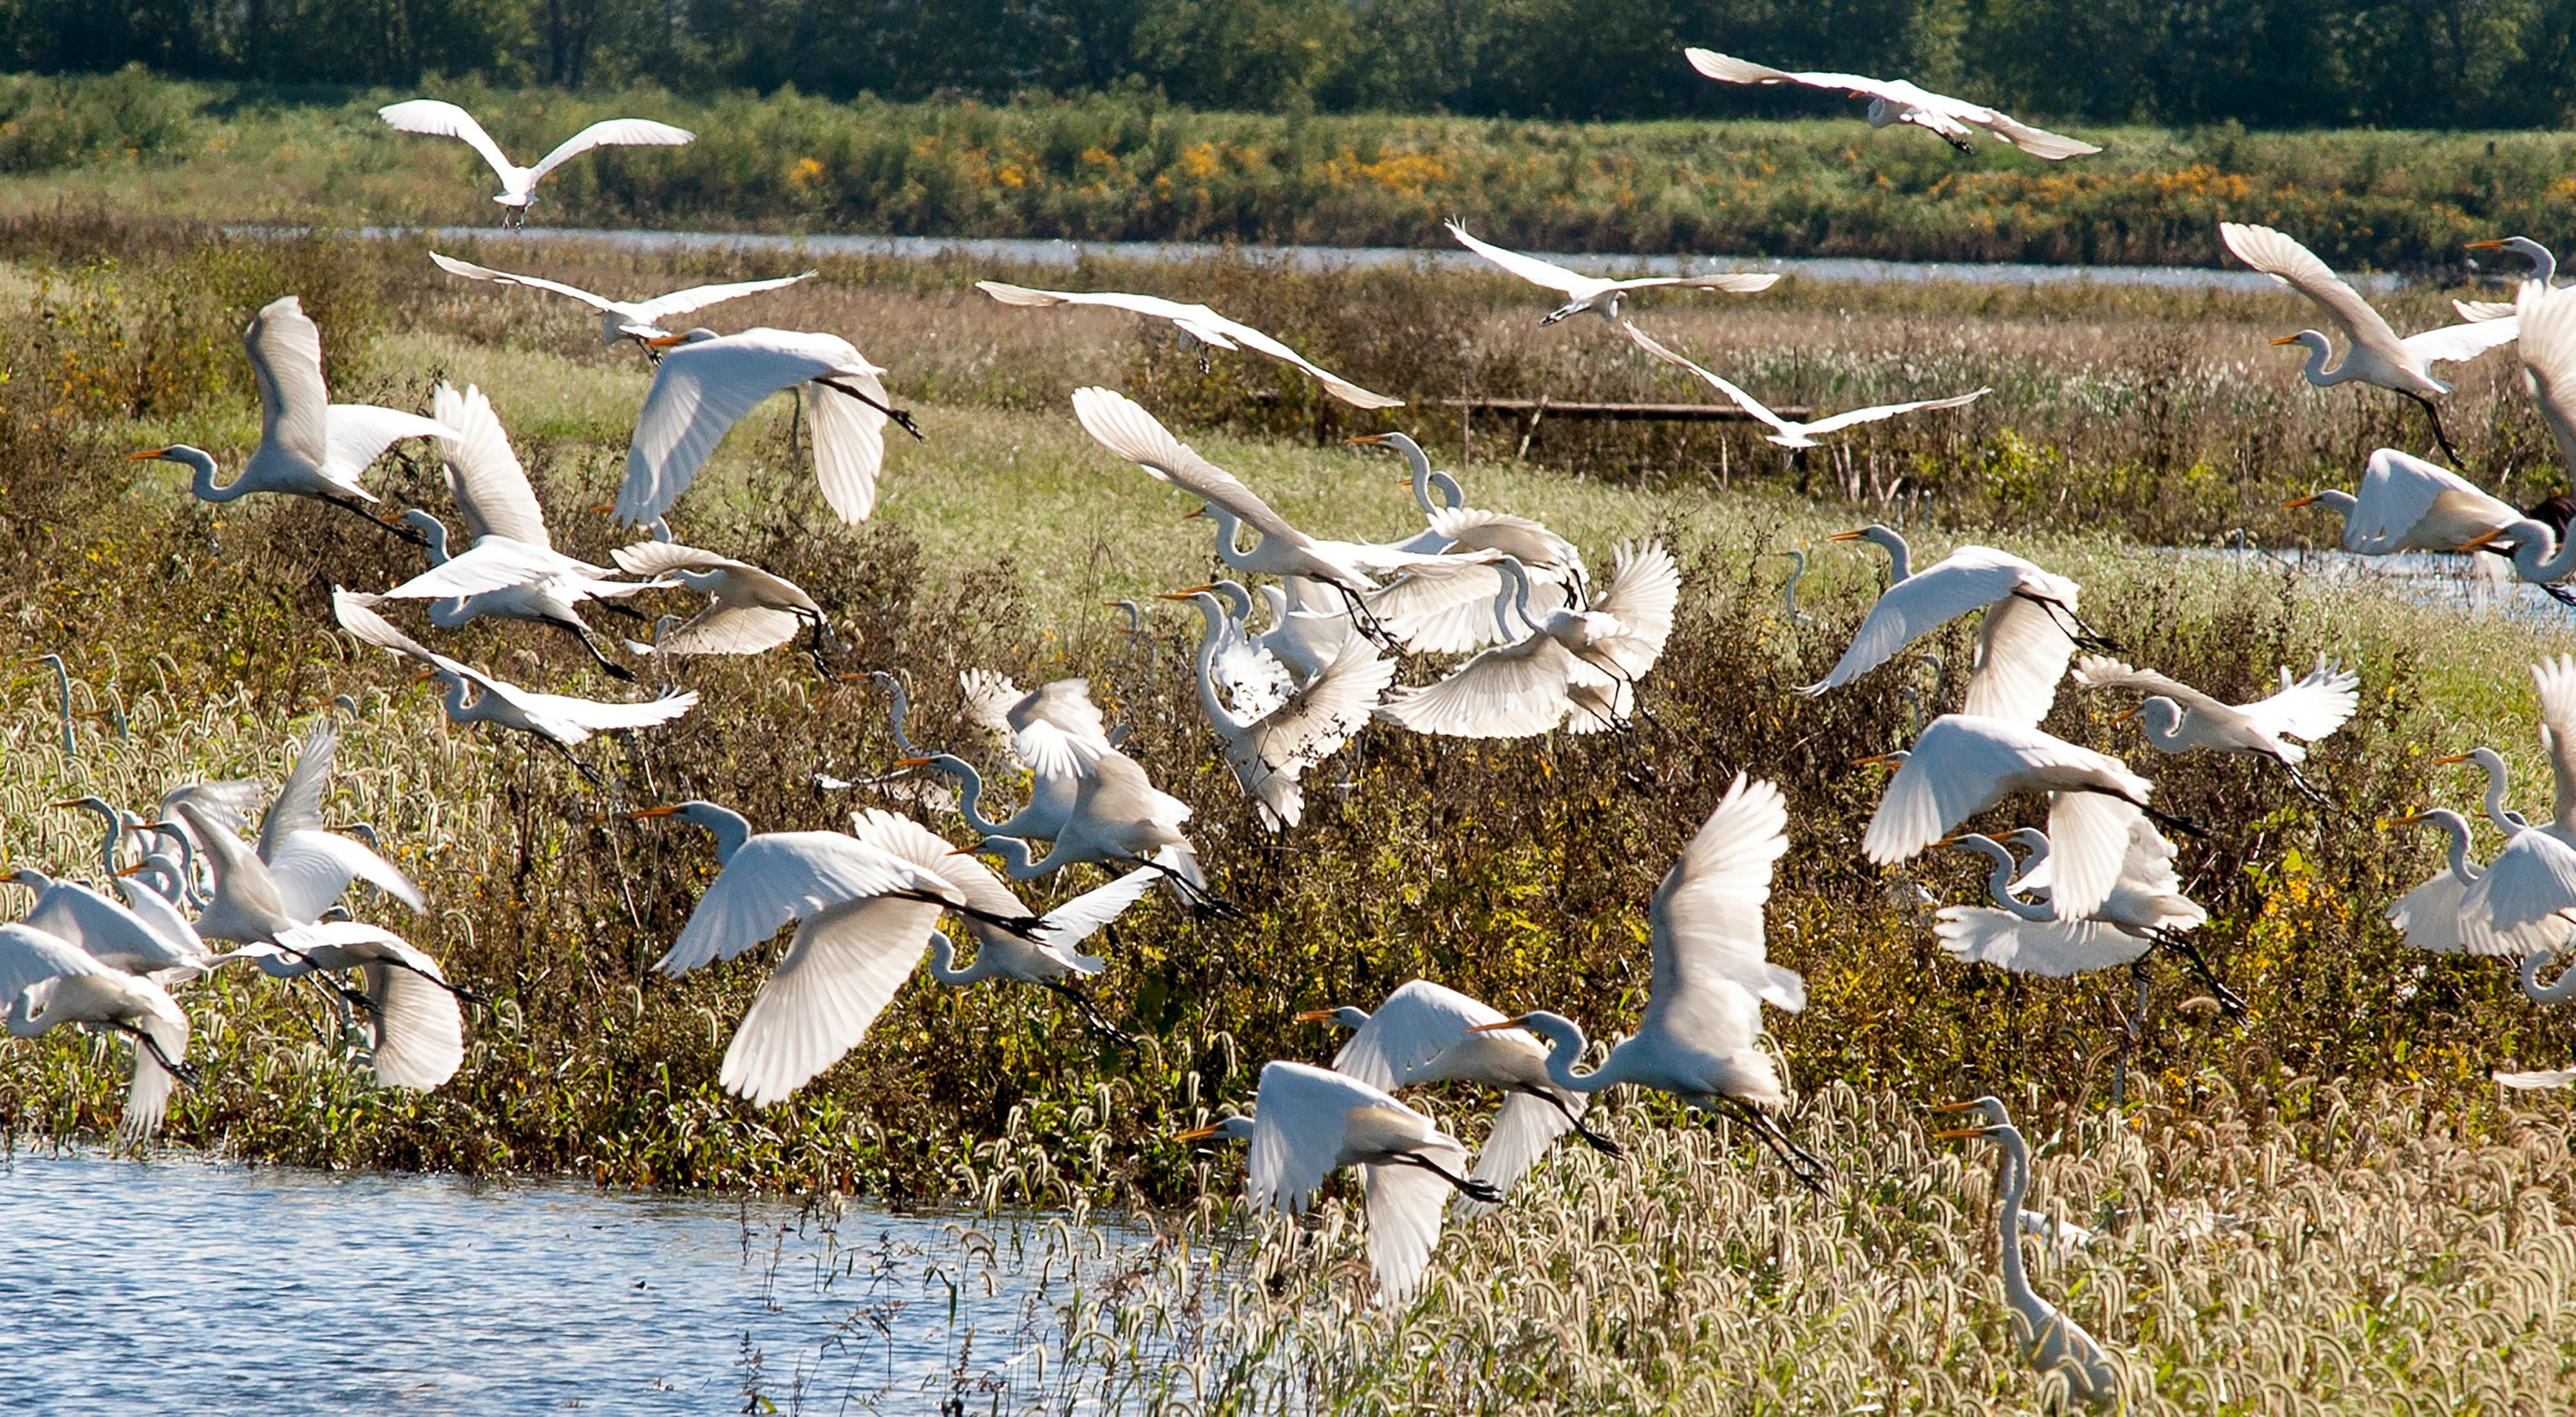 A large flock of long-necked white birds takes flight at The Nature Conservancy's Emiquon preserve. 